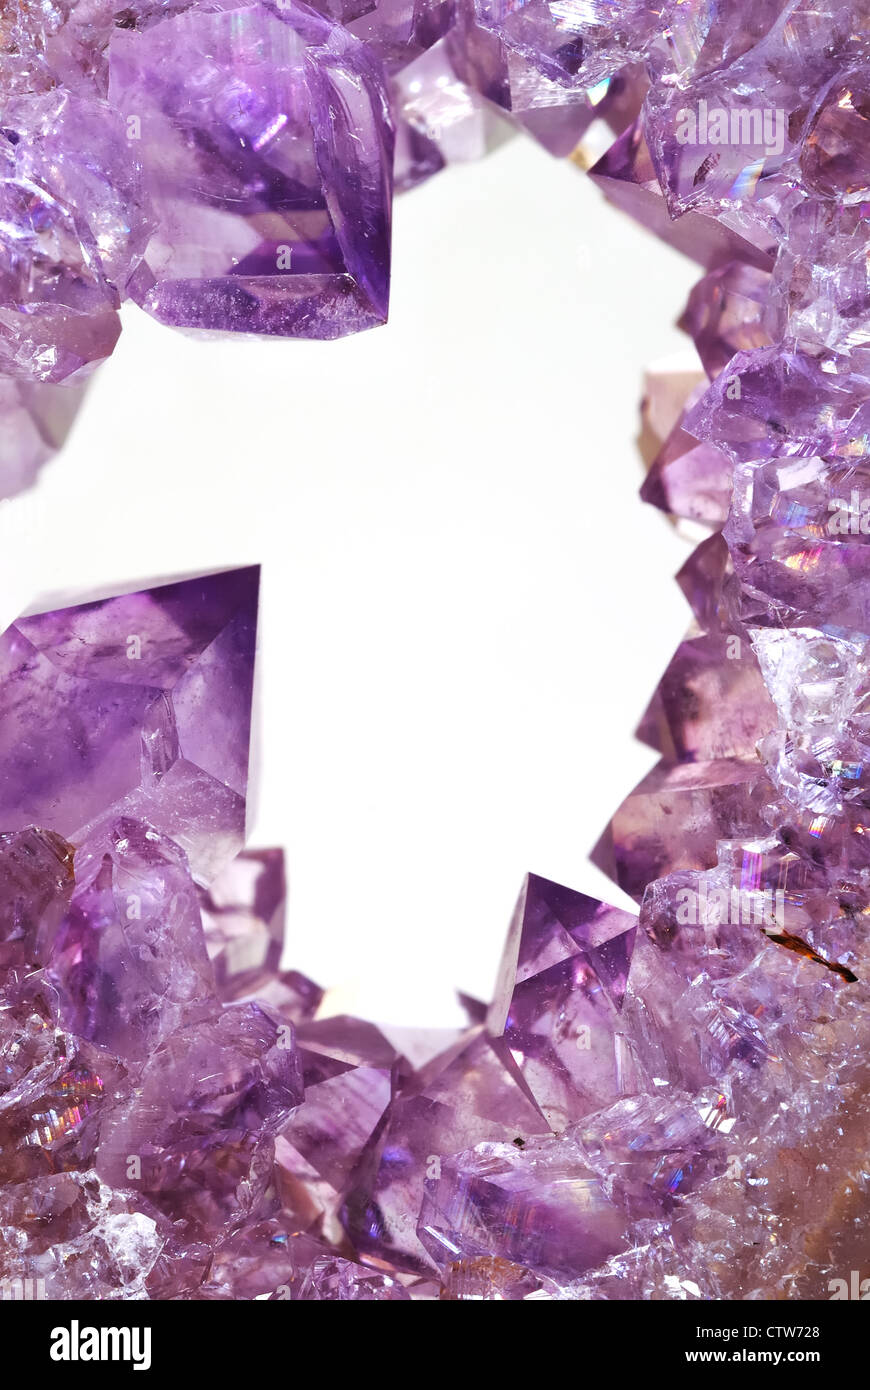 Crystals of amethyst Stock Photo